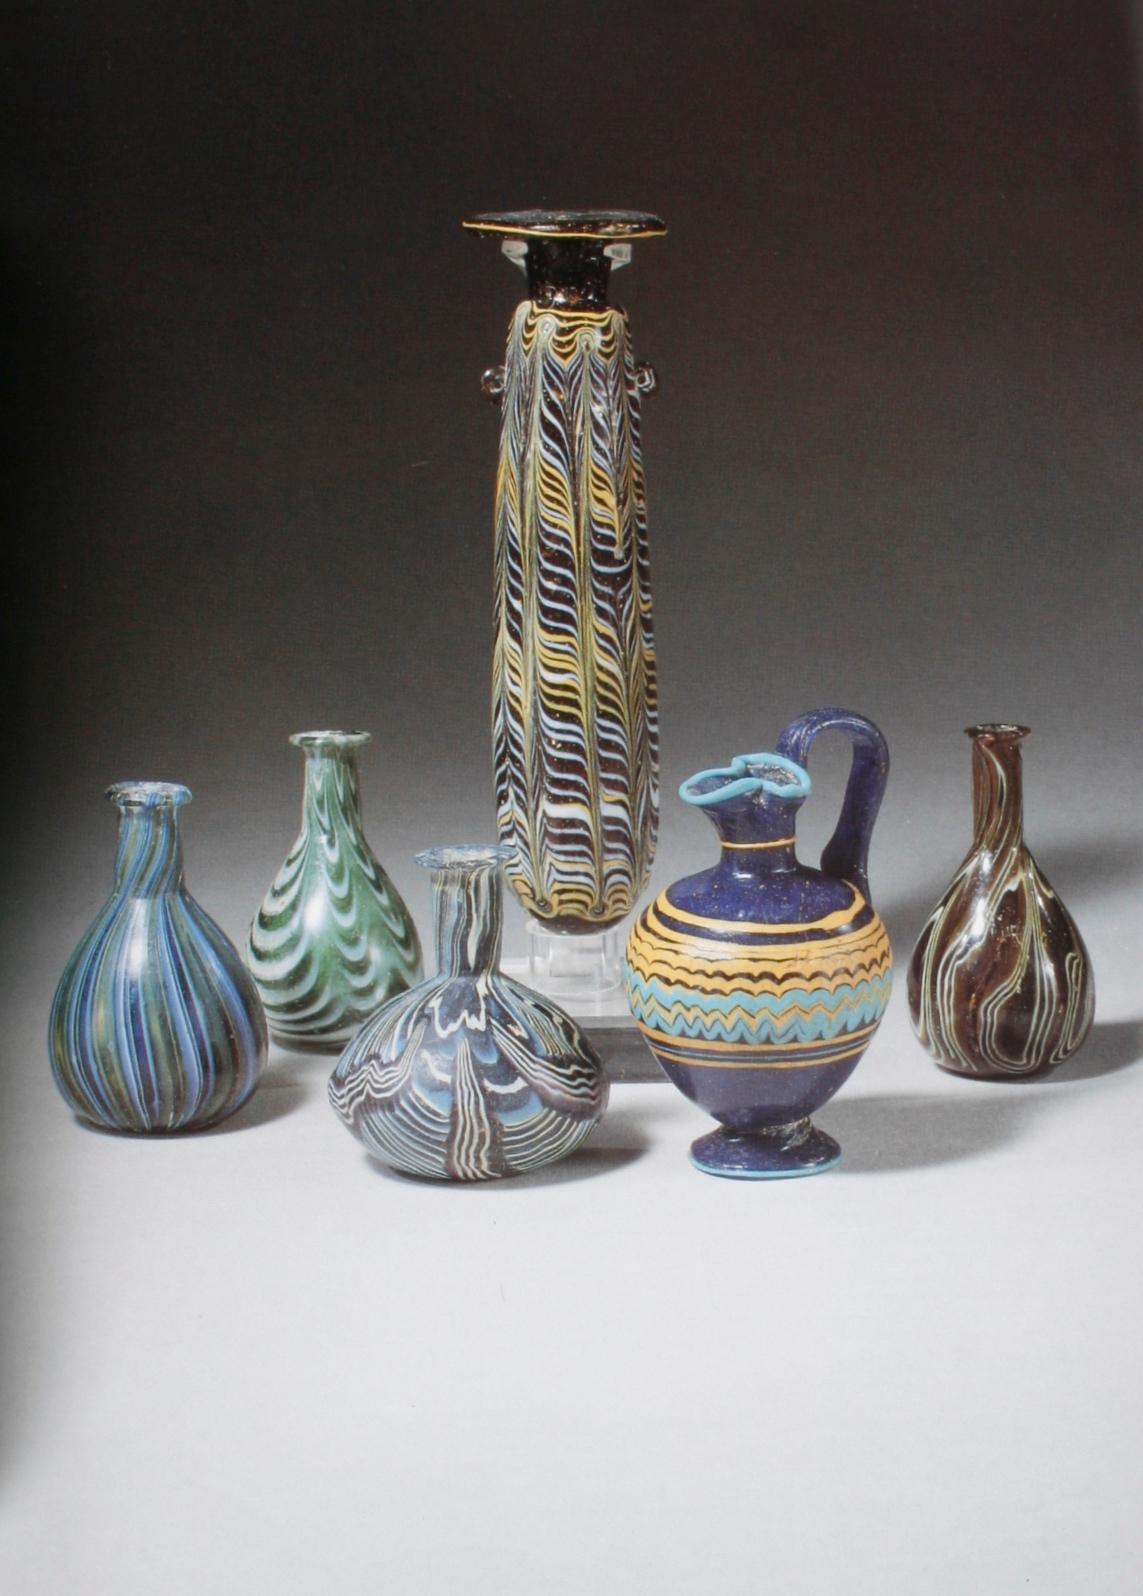 Sotheby's: The Breitbart Collection of Antiquities & Ancient Glass, 6/1990. 145 lots, Ancient Glass; Egyptian, Western Asiatic, and classical antiquities. Fully illustrated softcover auction catalog. Great reference on a hard to find category.
NPT